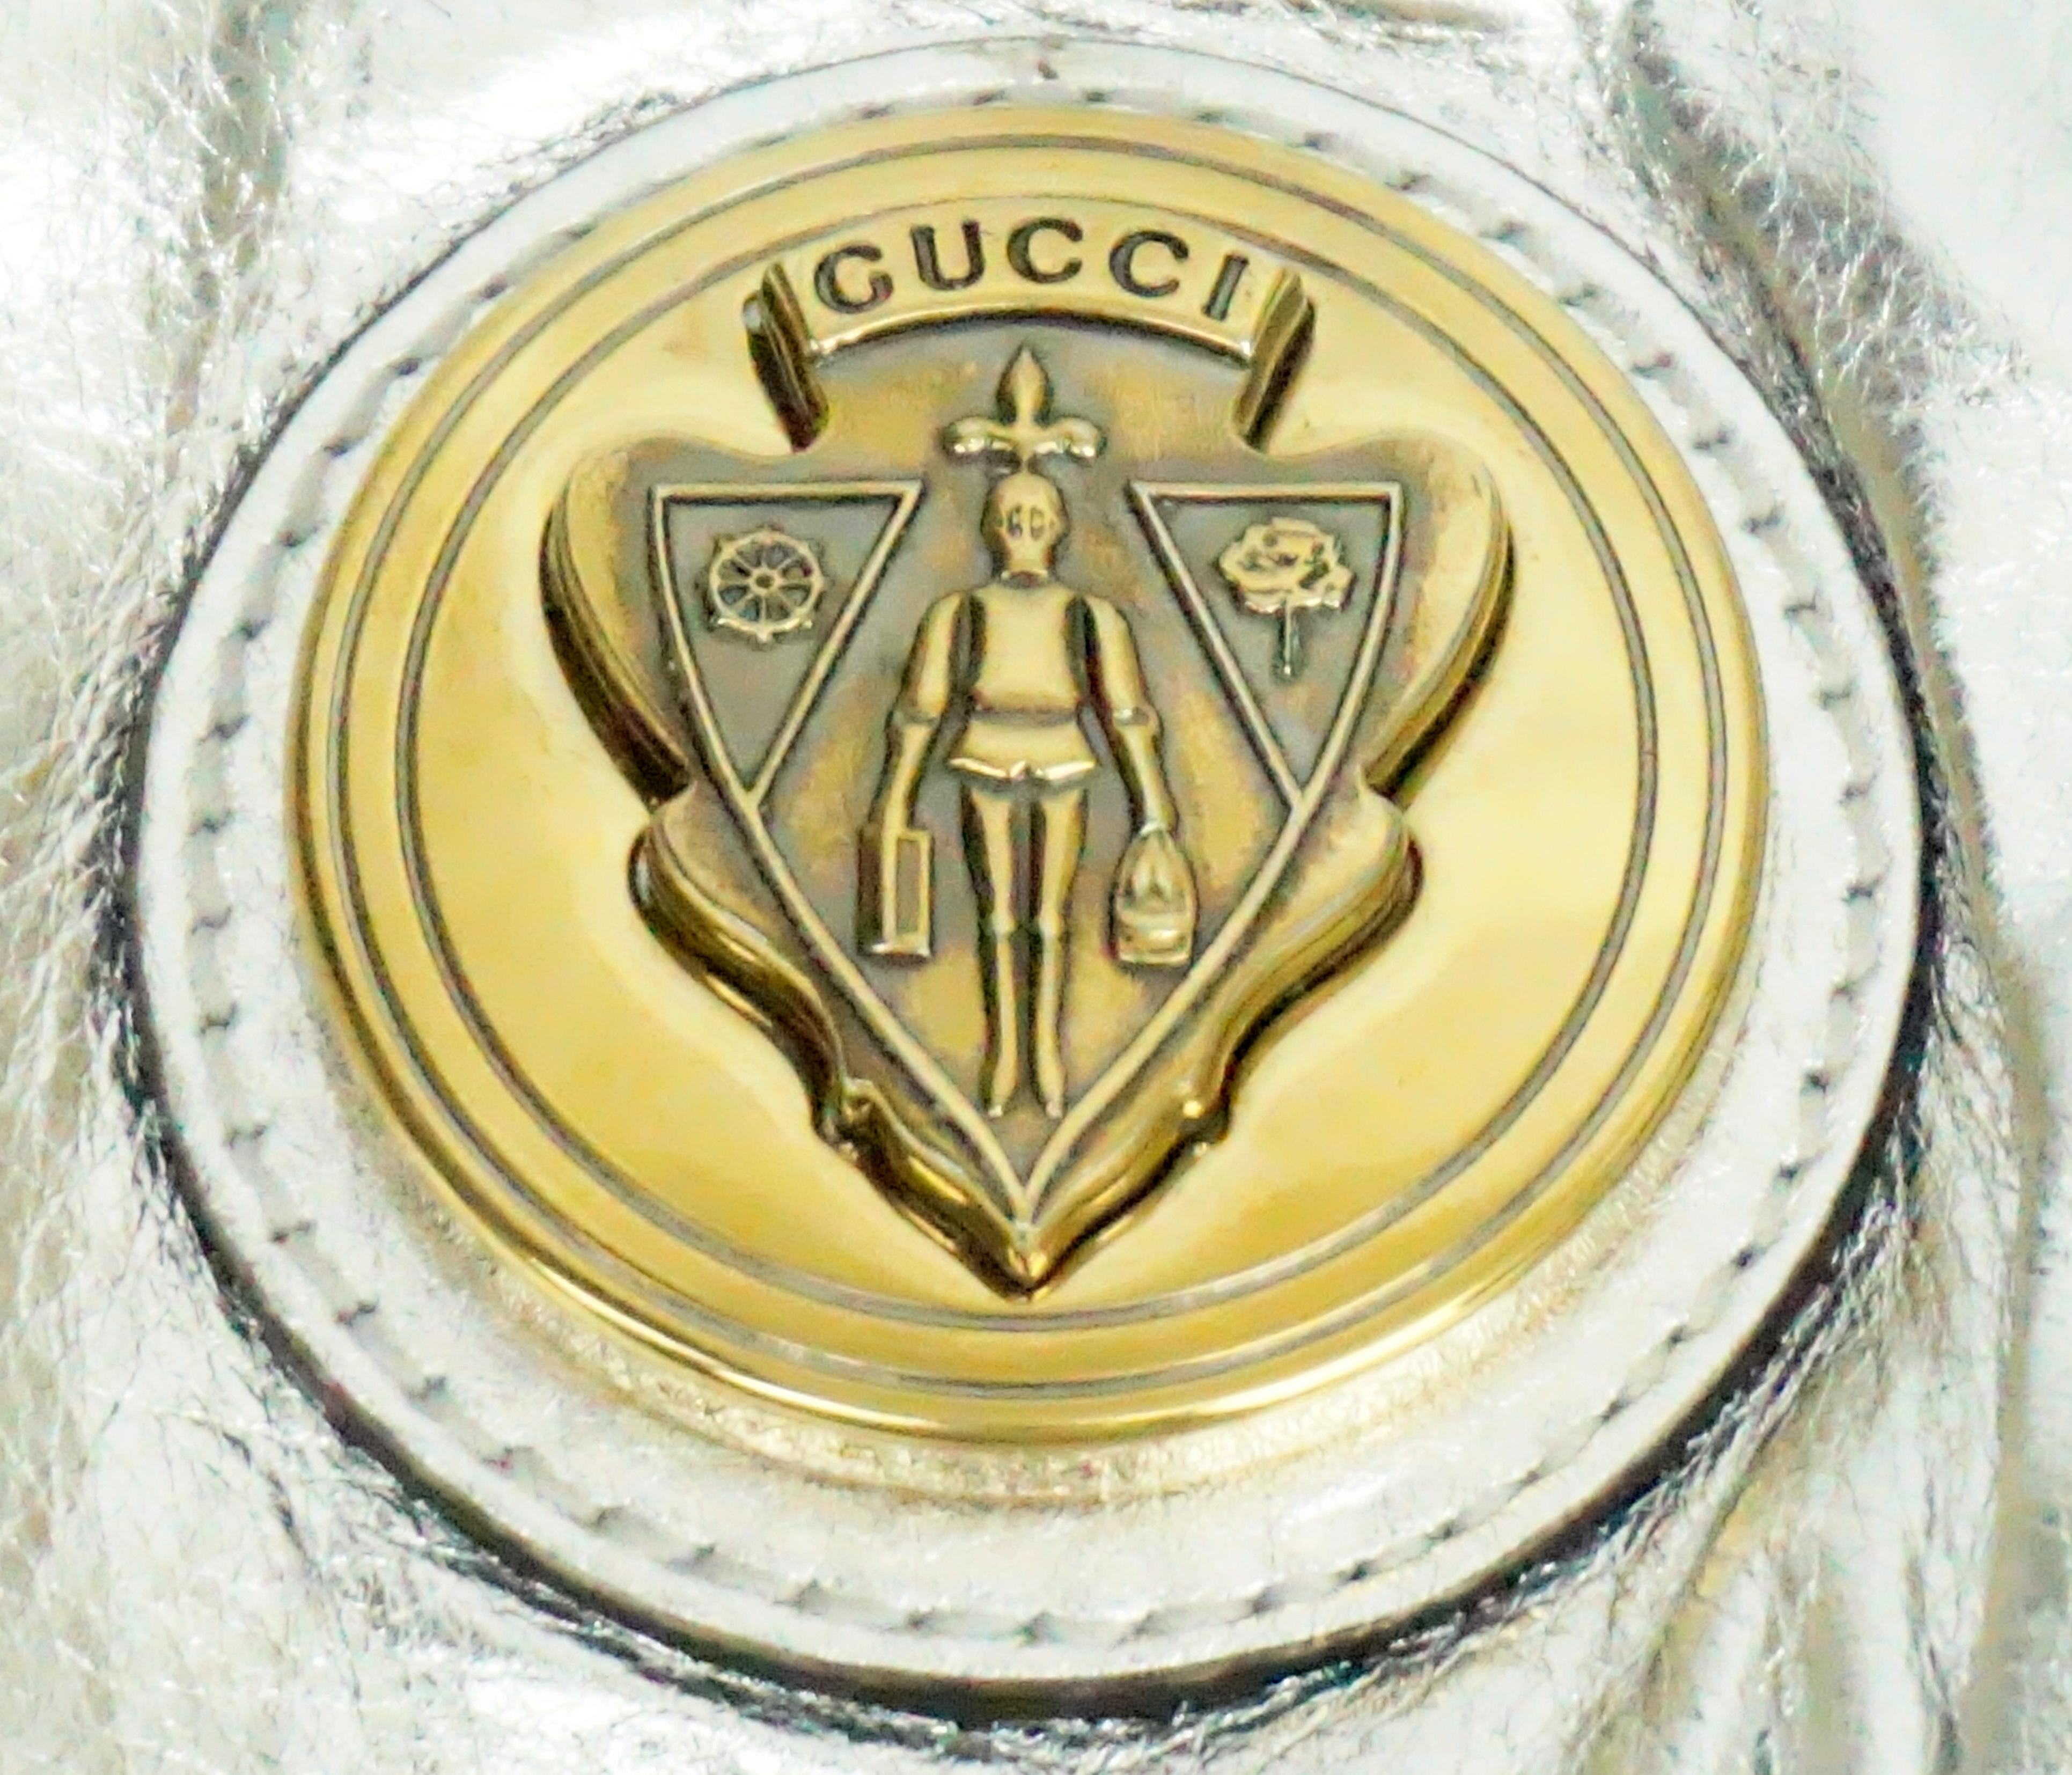 Gucci Silver Metallic Leather Clutch with Gold Emblem 1